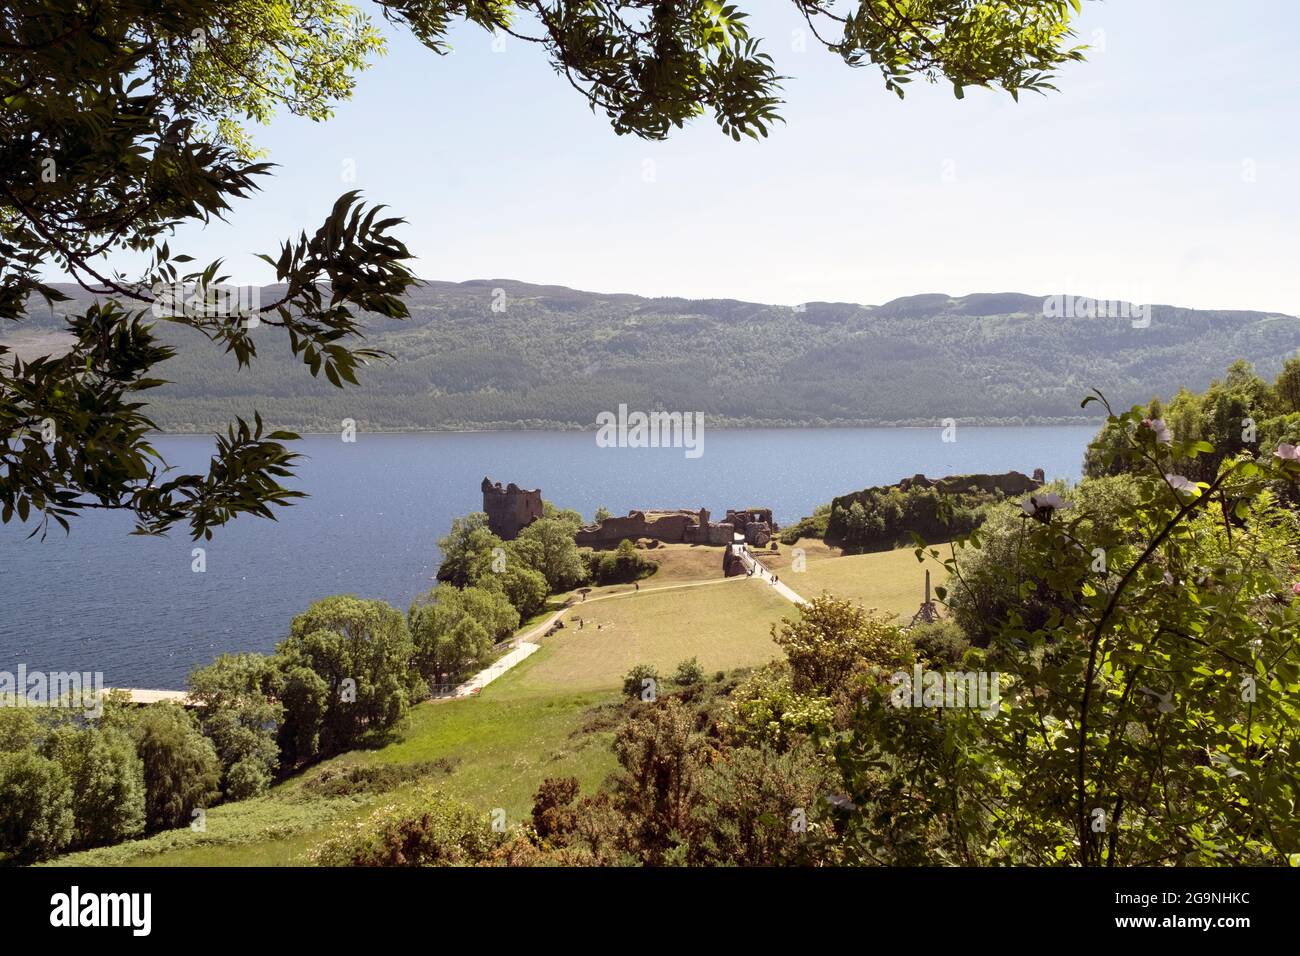 View of Urquhart Castle on the banks of Loch Ness, Scotland. Stock Photo